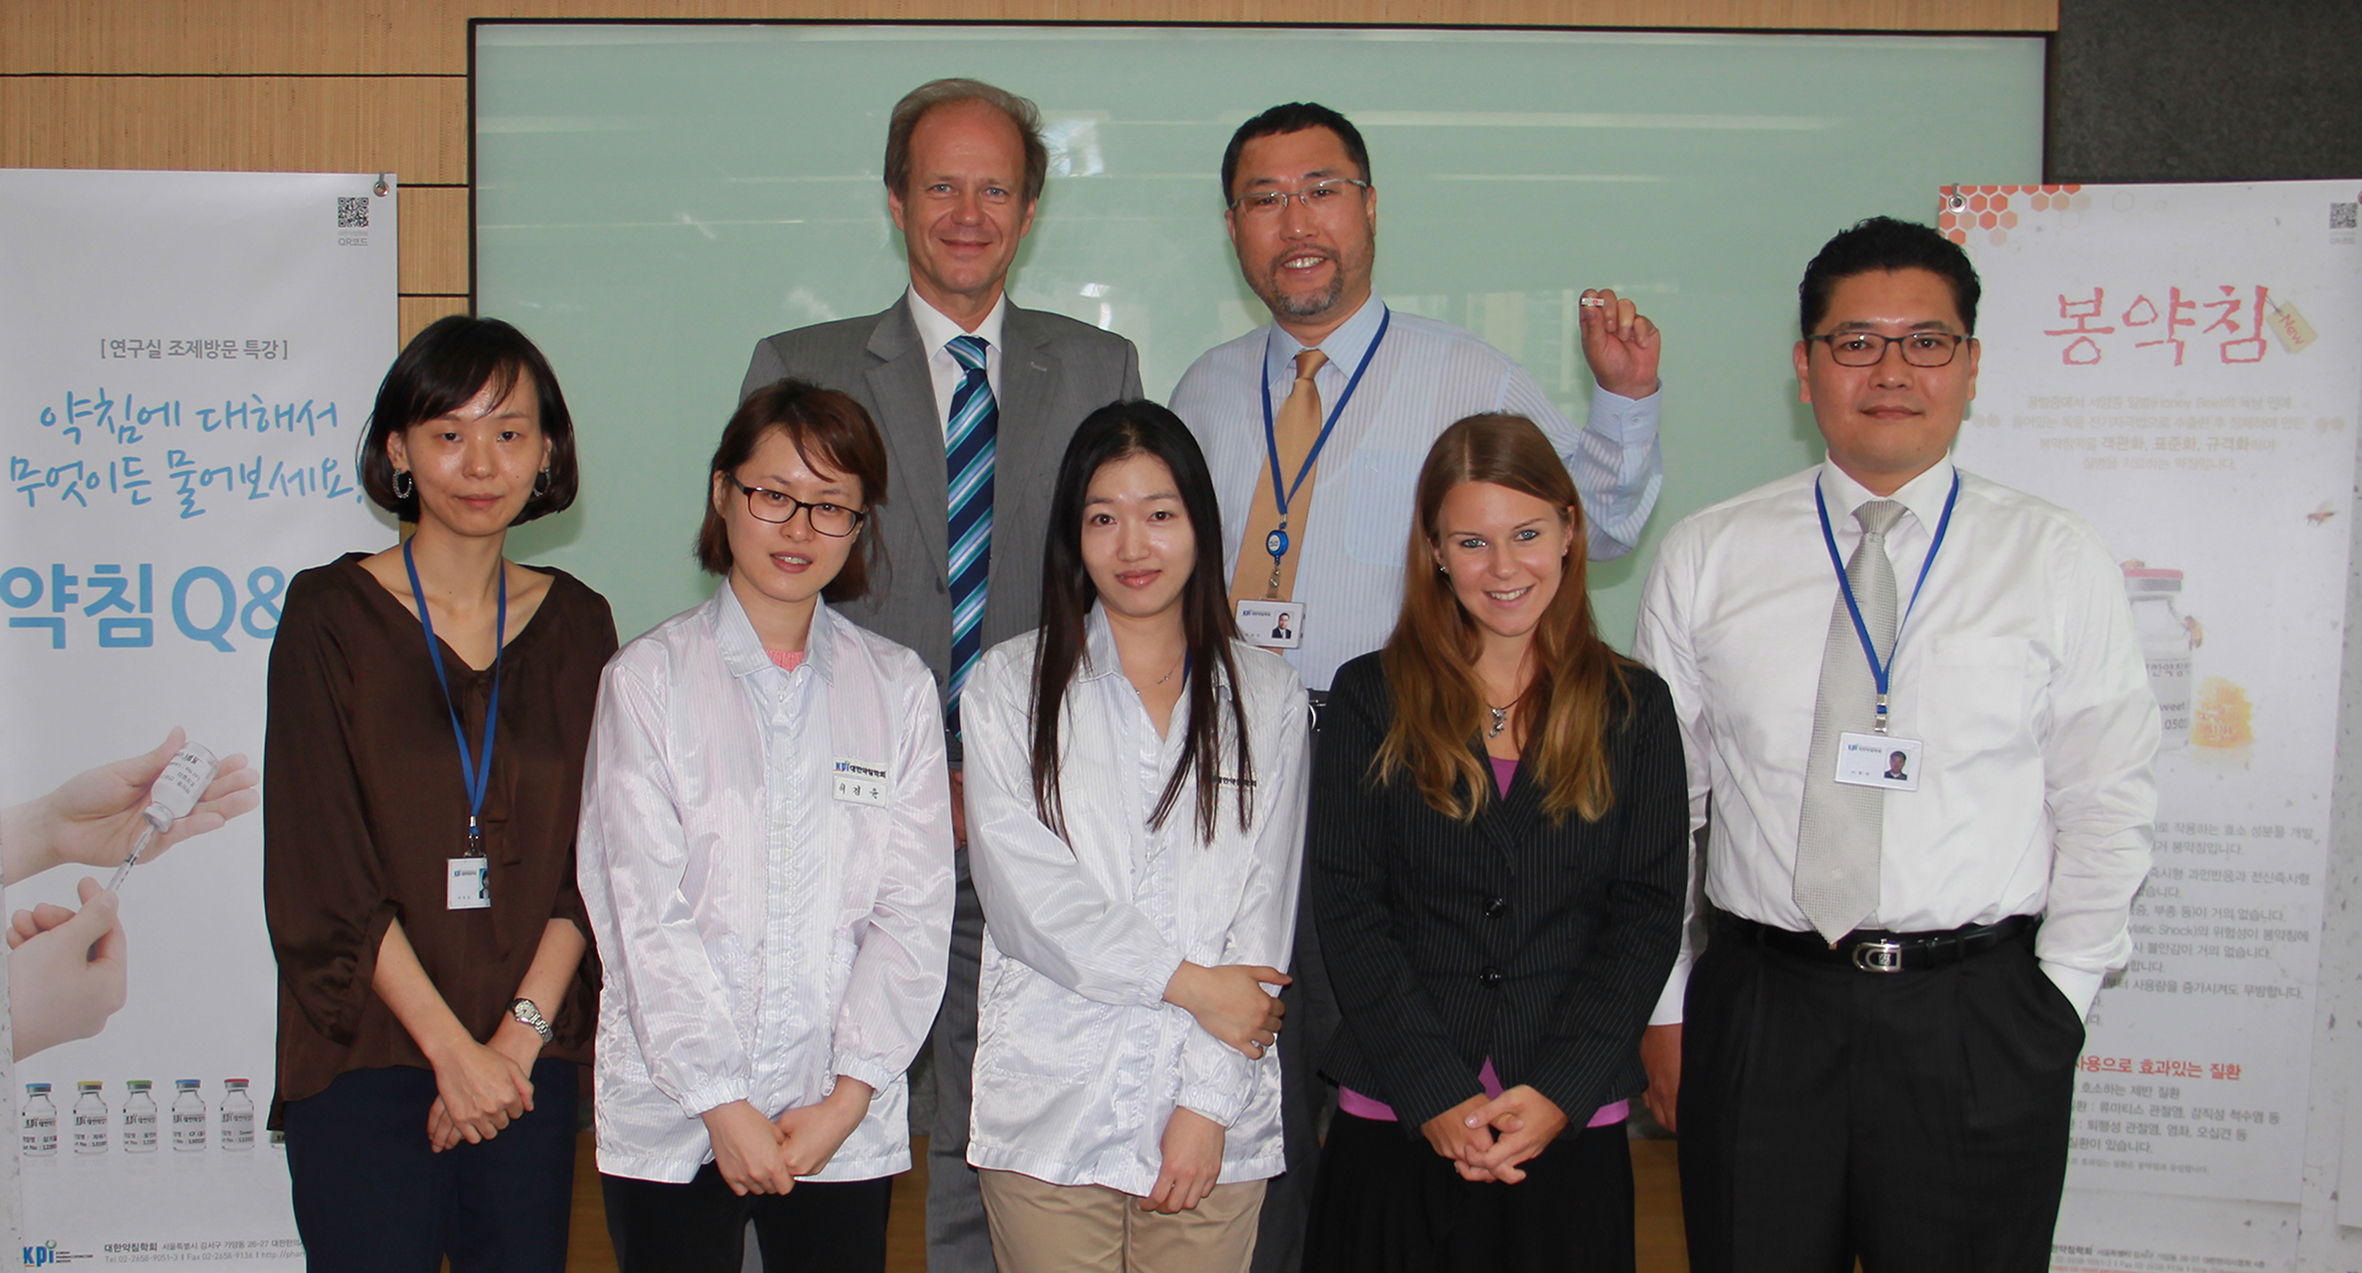 Warm welcome from the Korean Pharmacopuncture Institute (KPI) for the Austrian authors of this article on Sept. 14, 2012.